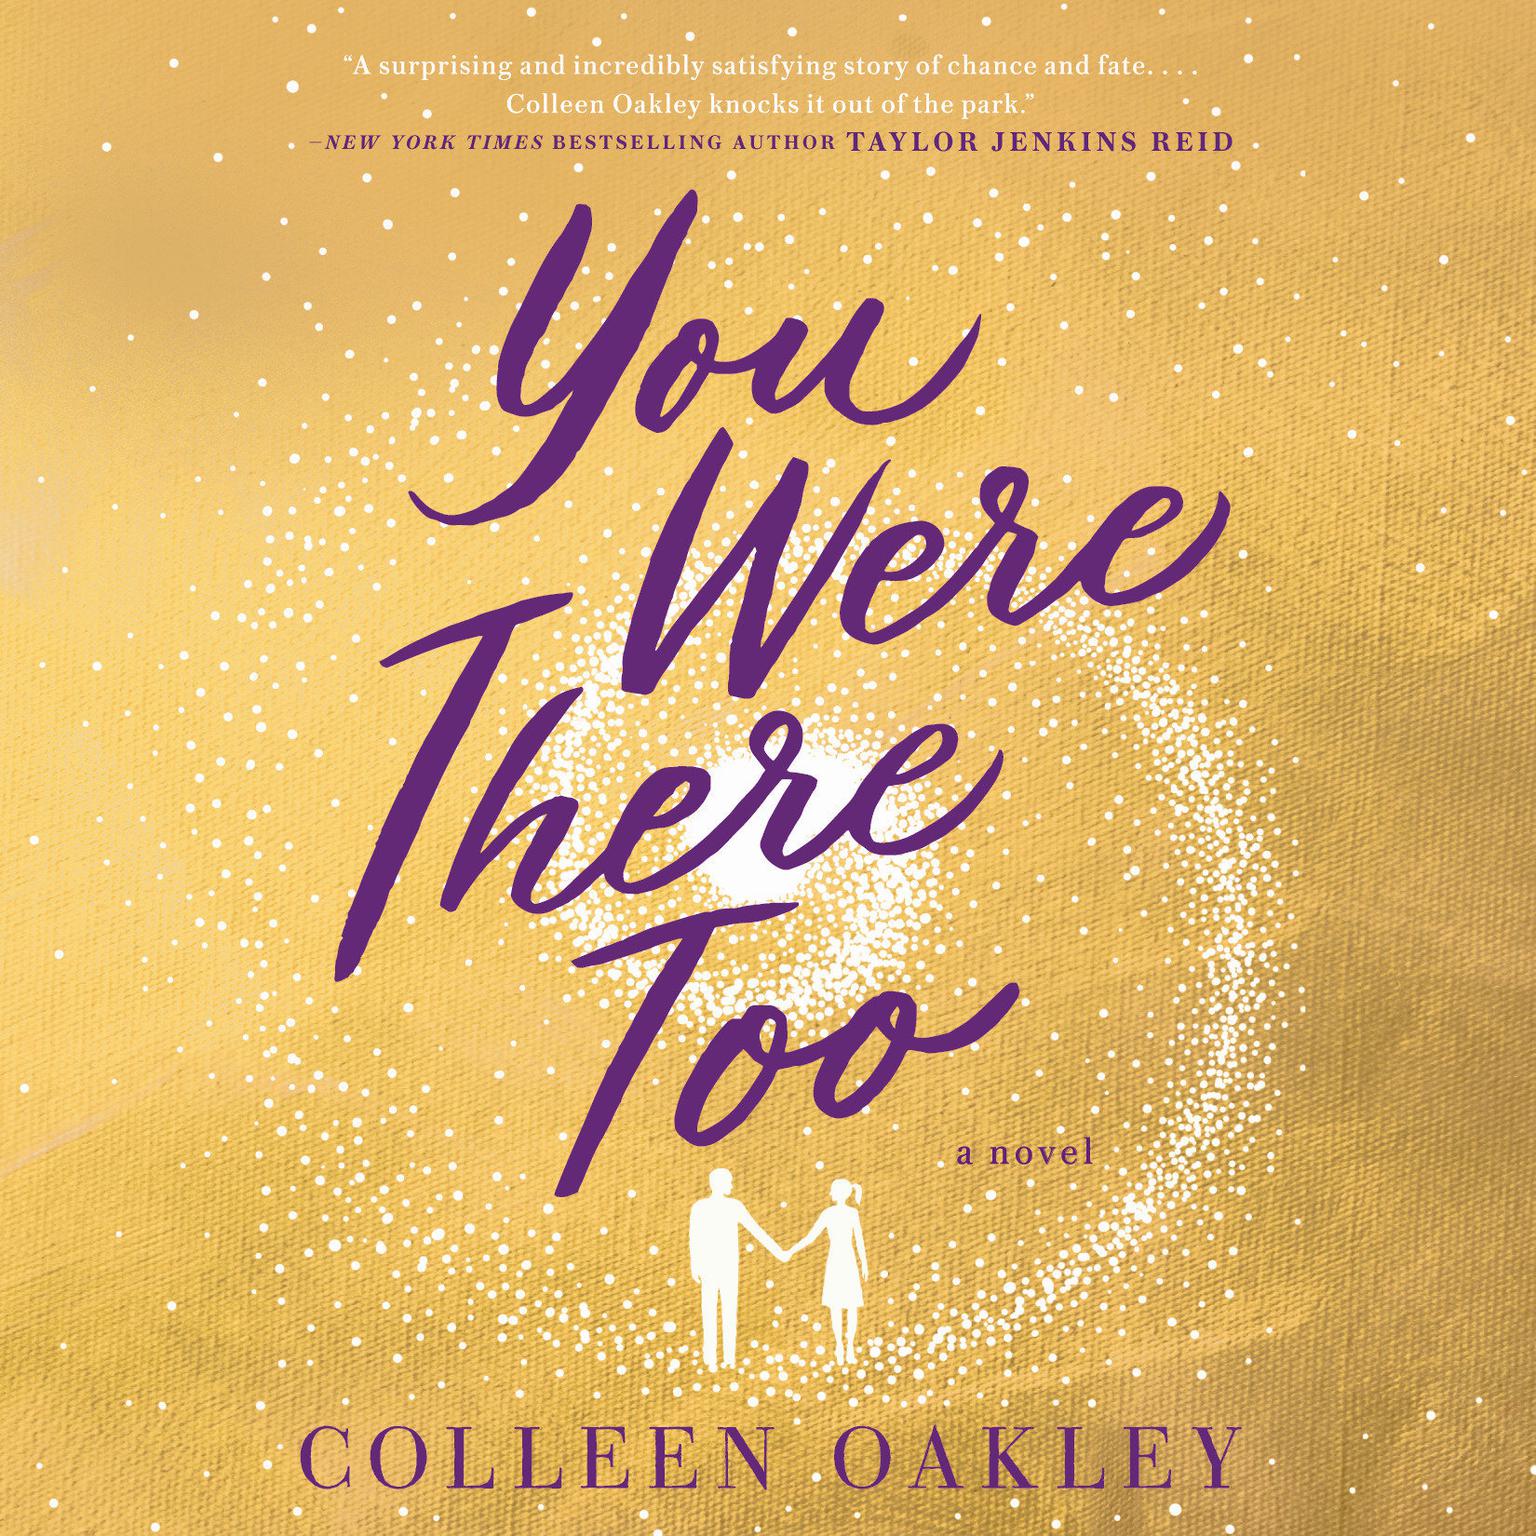 You Were There Too Audiobook, by Colleen Oakley